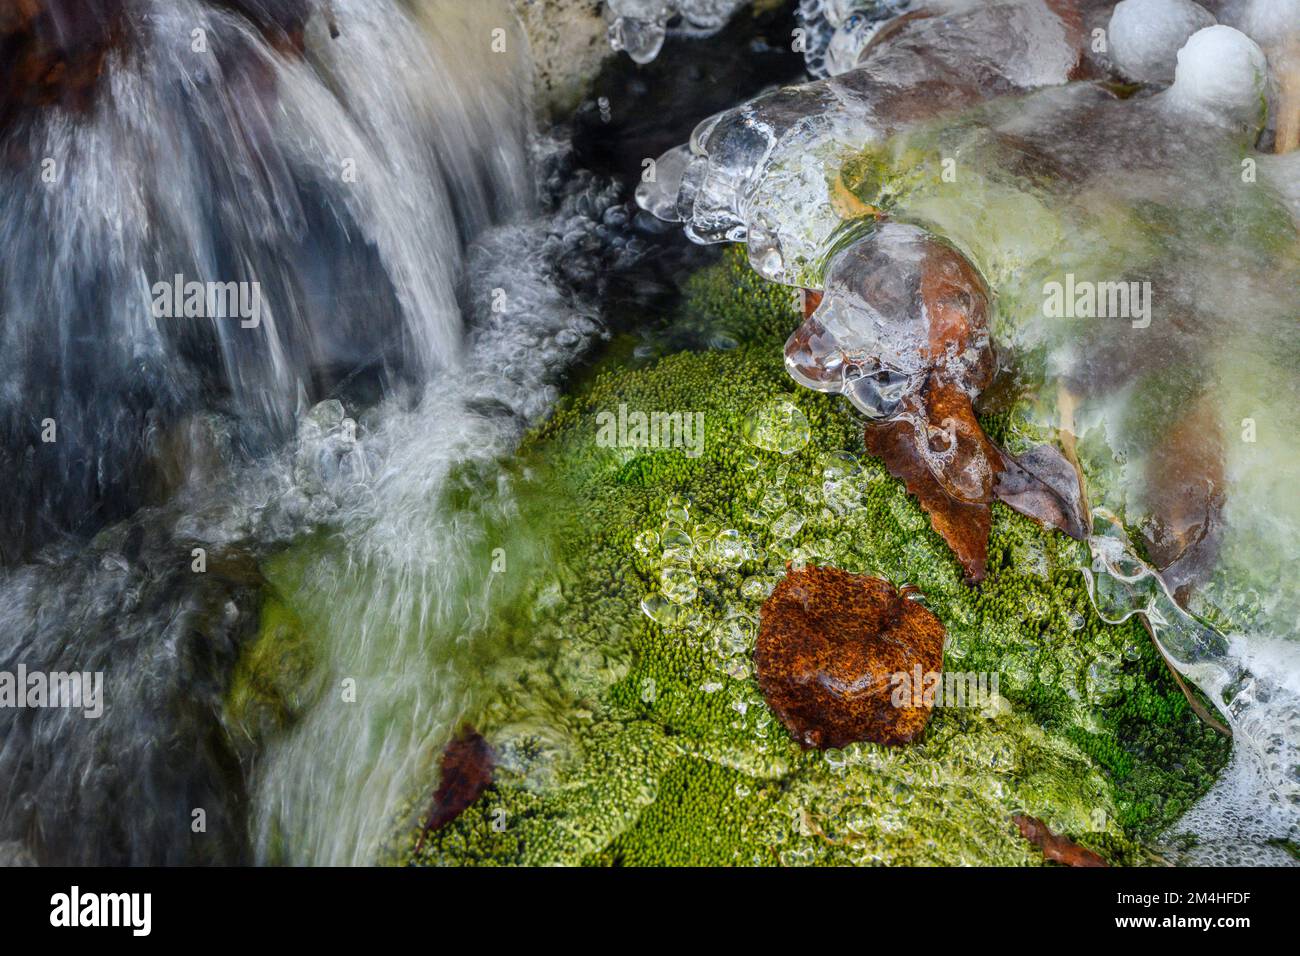 Running water, ice and moss in a small runoff creek, Greater Sudbury, Ontario, Canada Stock Photo